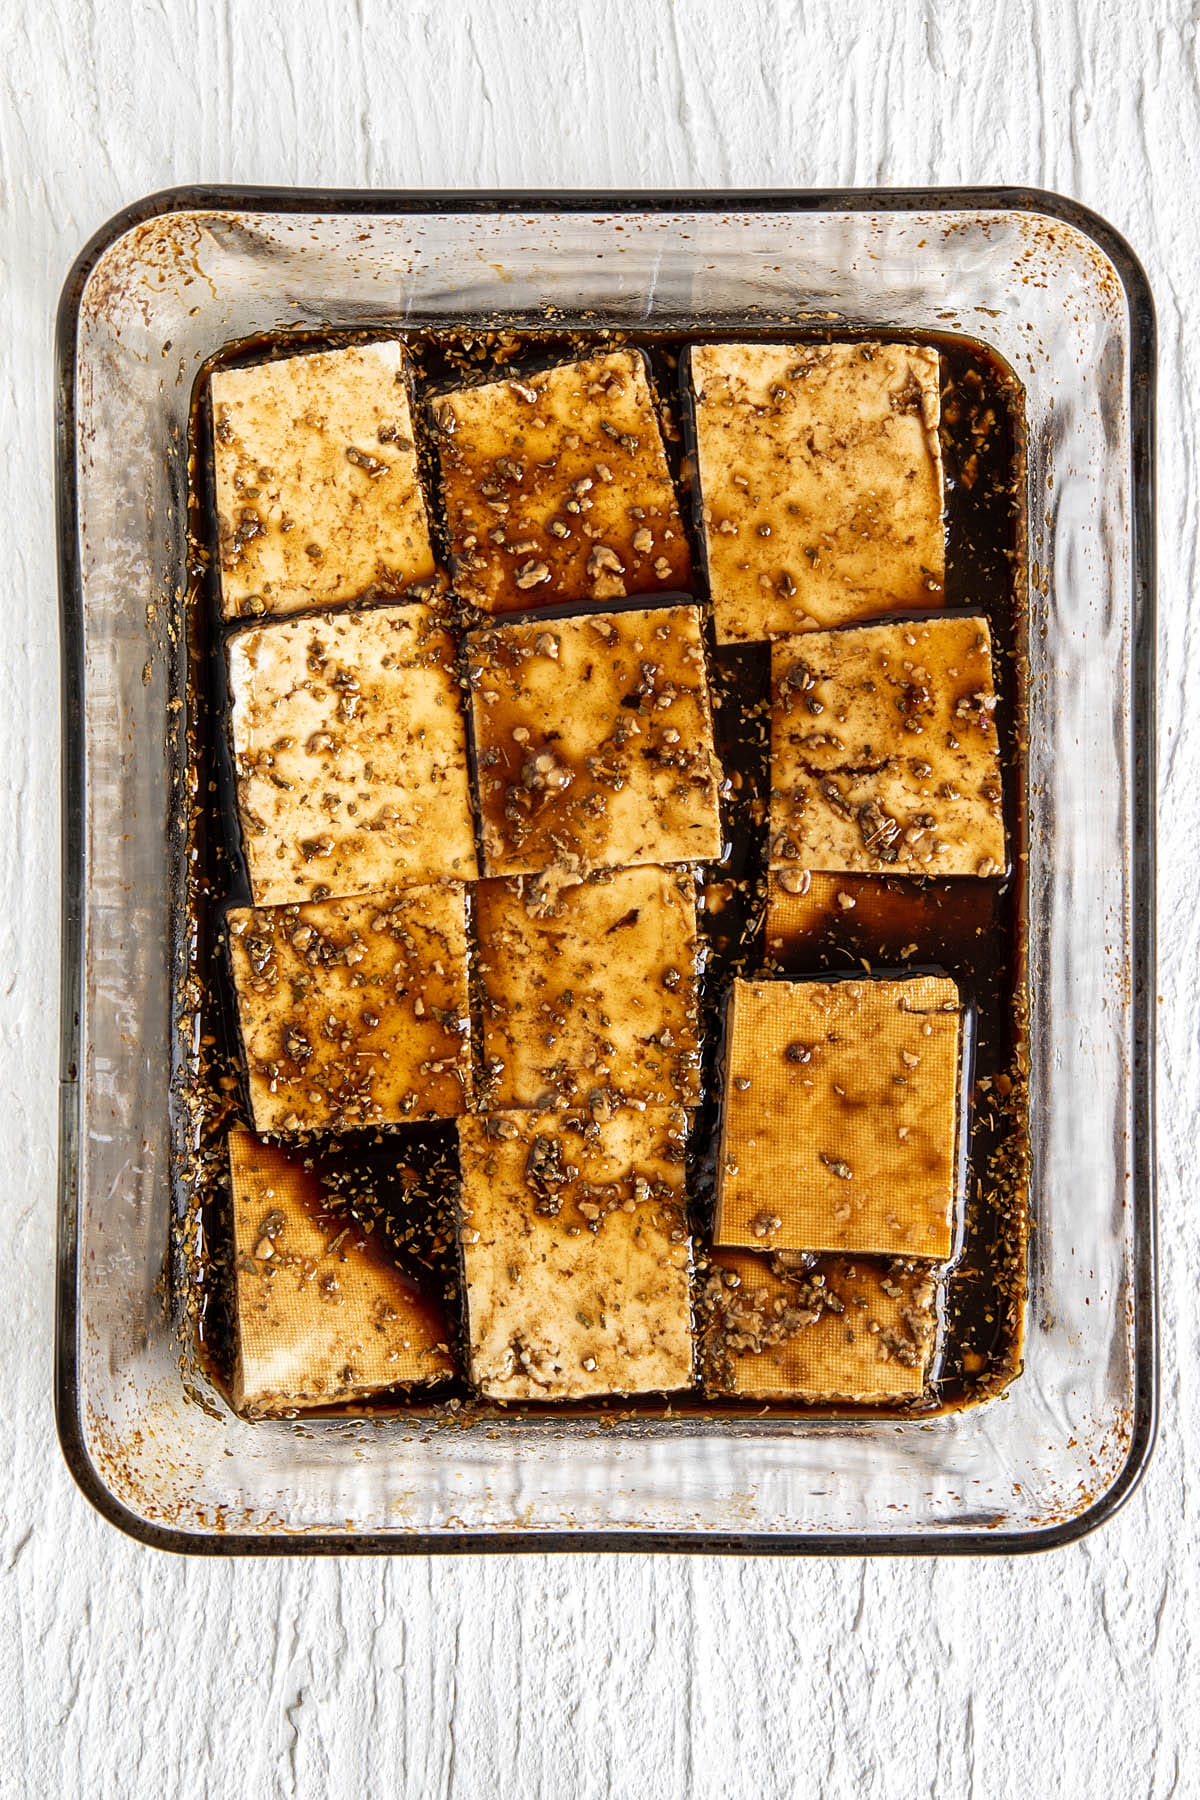 Tofu pieces in a large shallow baking dish.